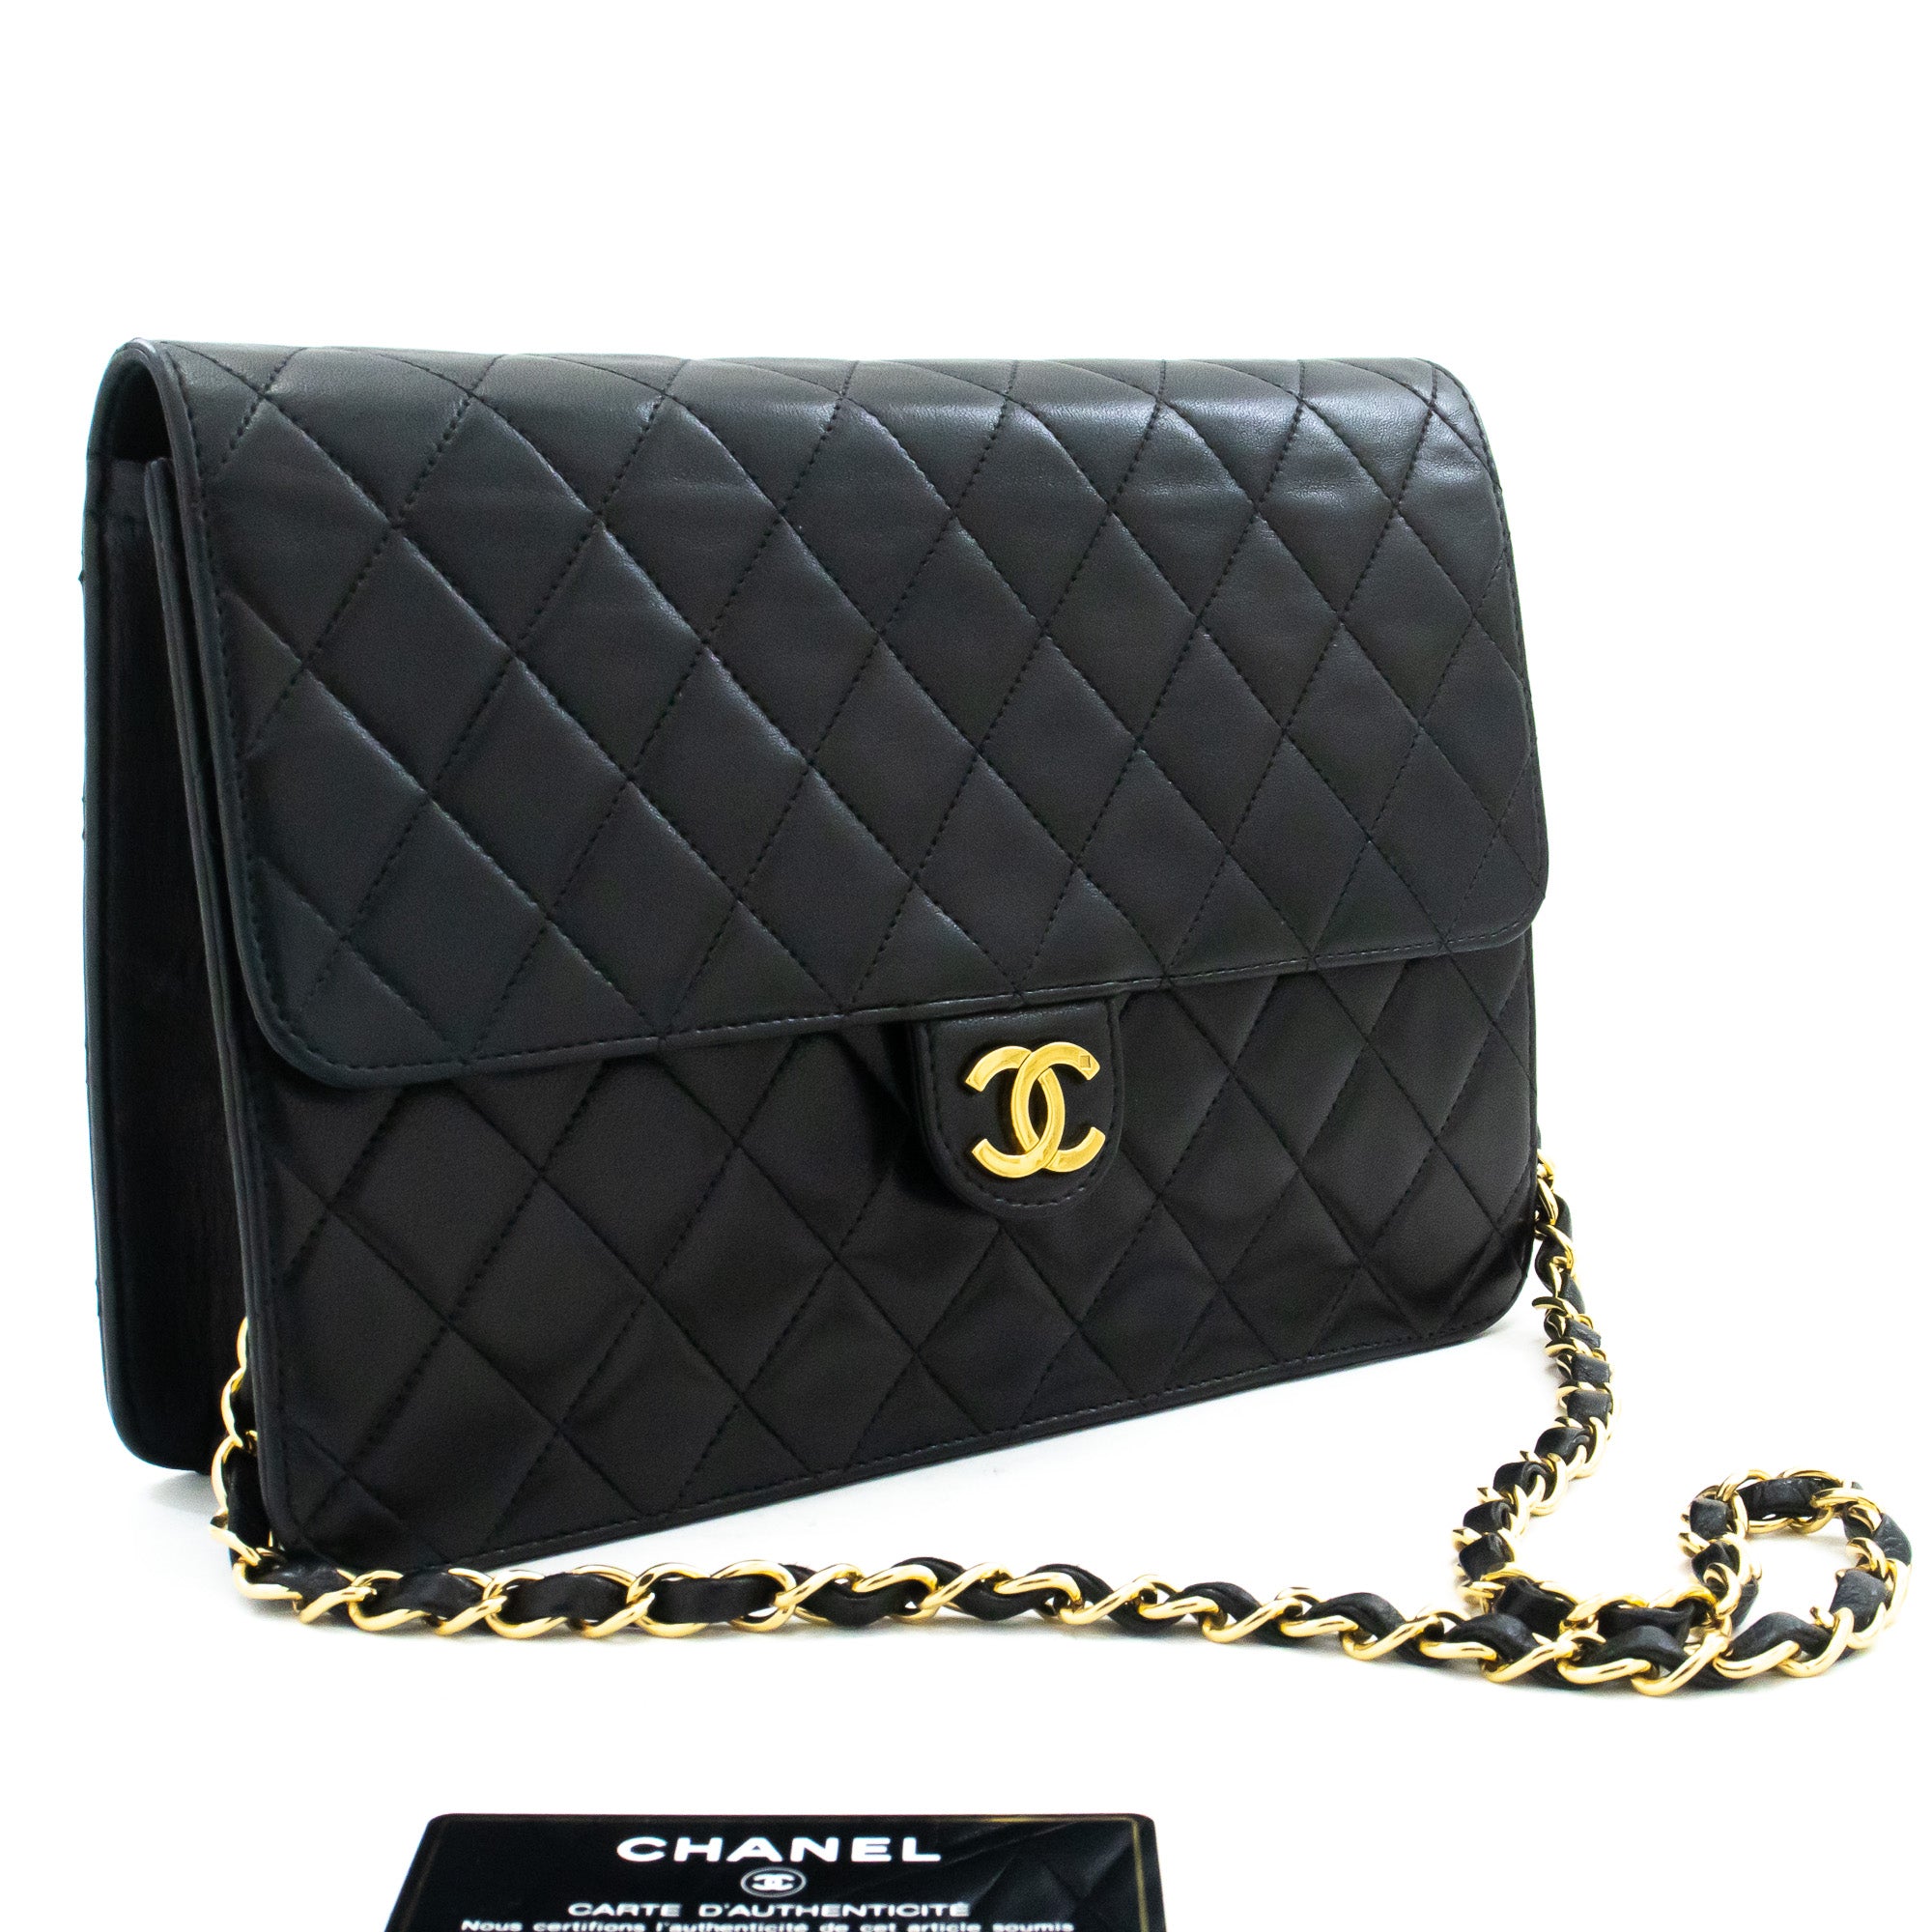 Snag the Latest CHANEL Satchel/Top Handle Bag Quilted Bags